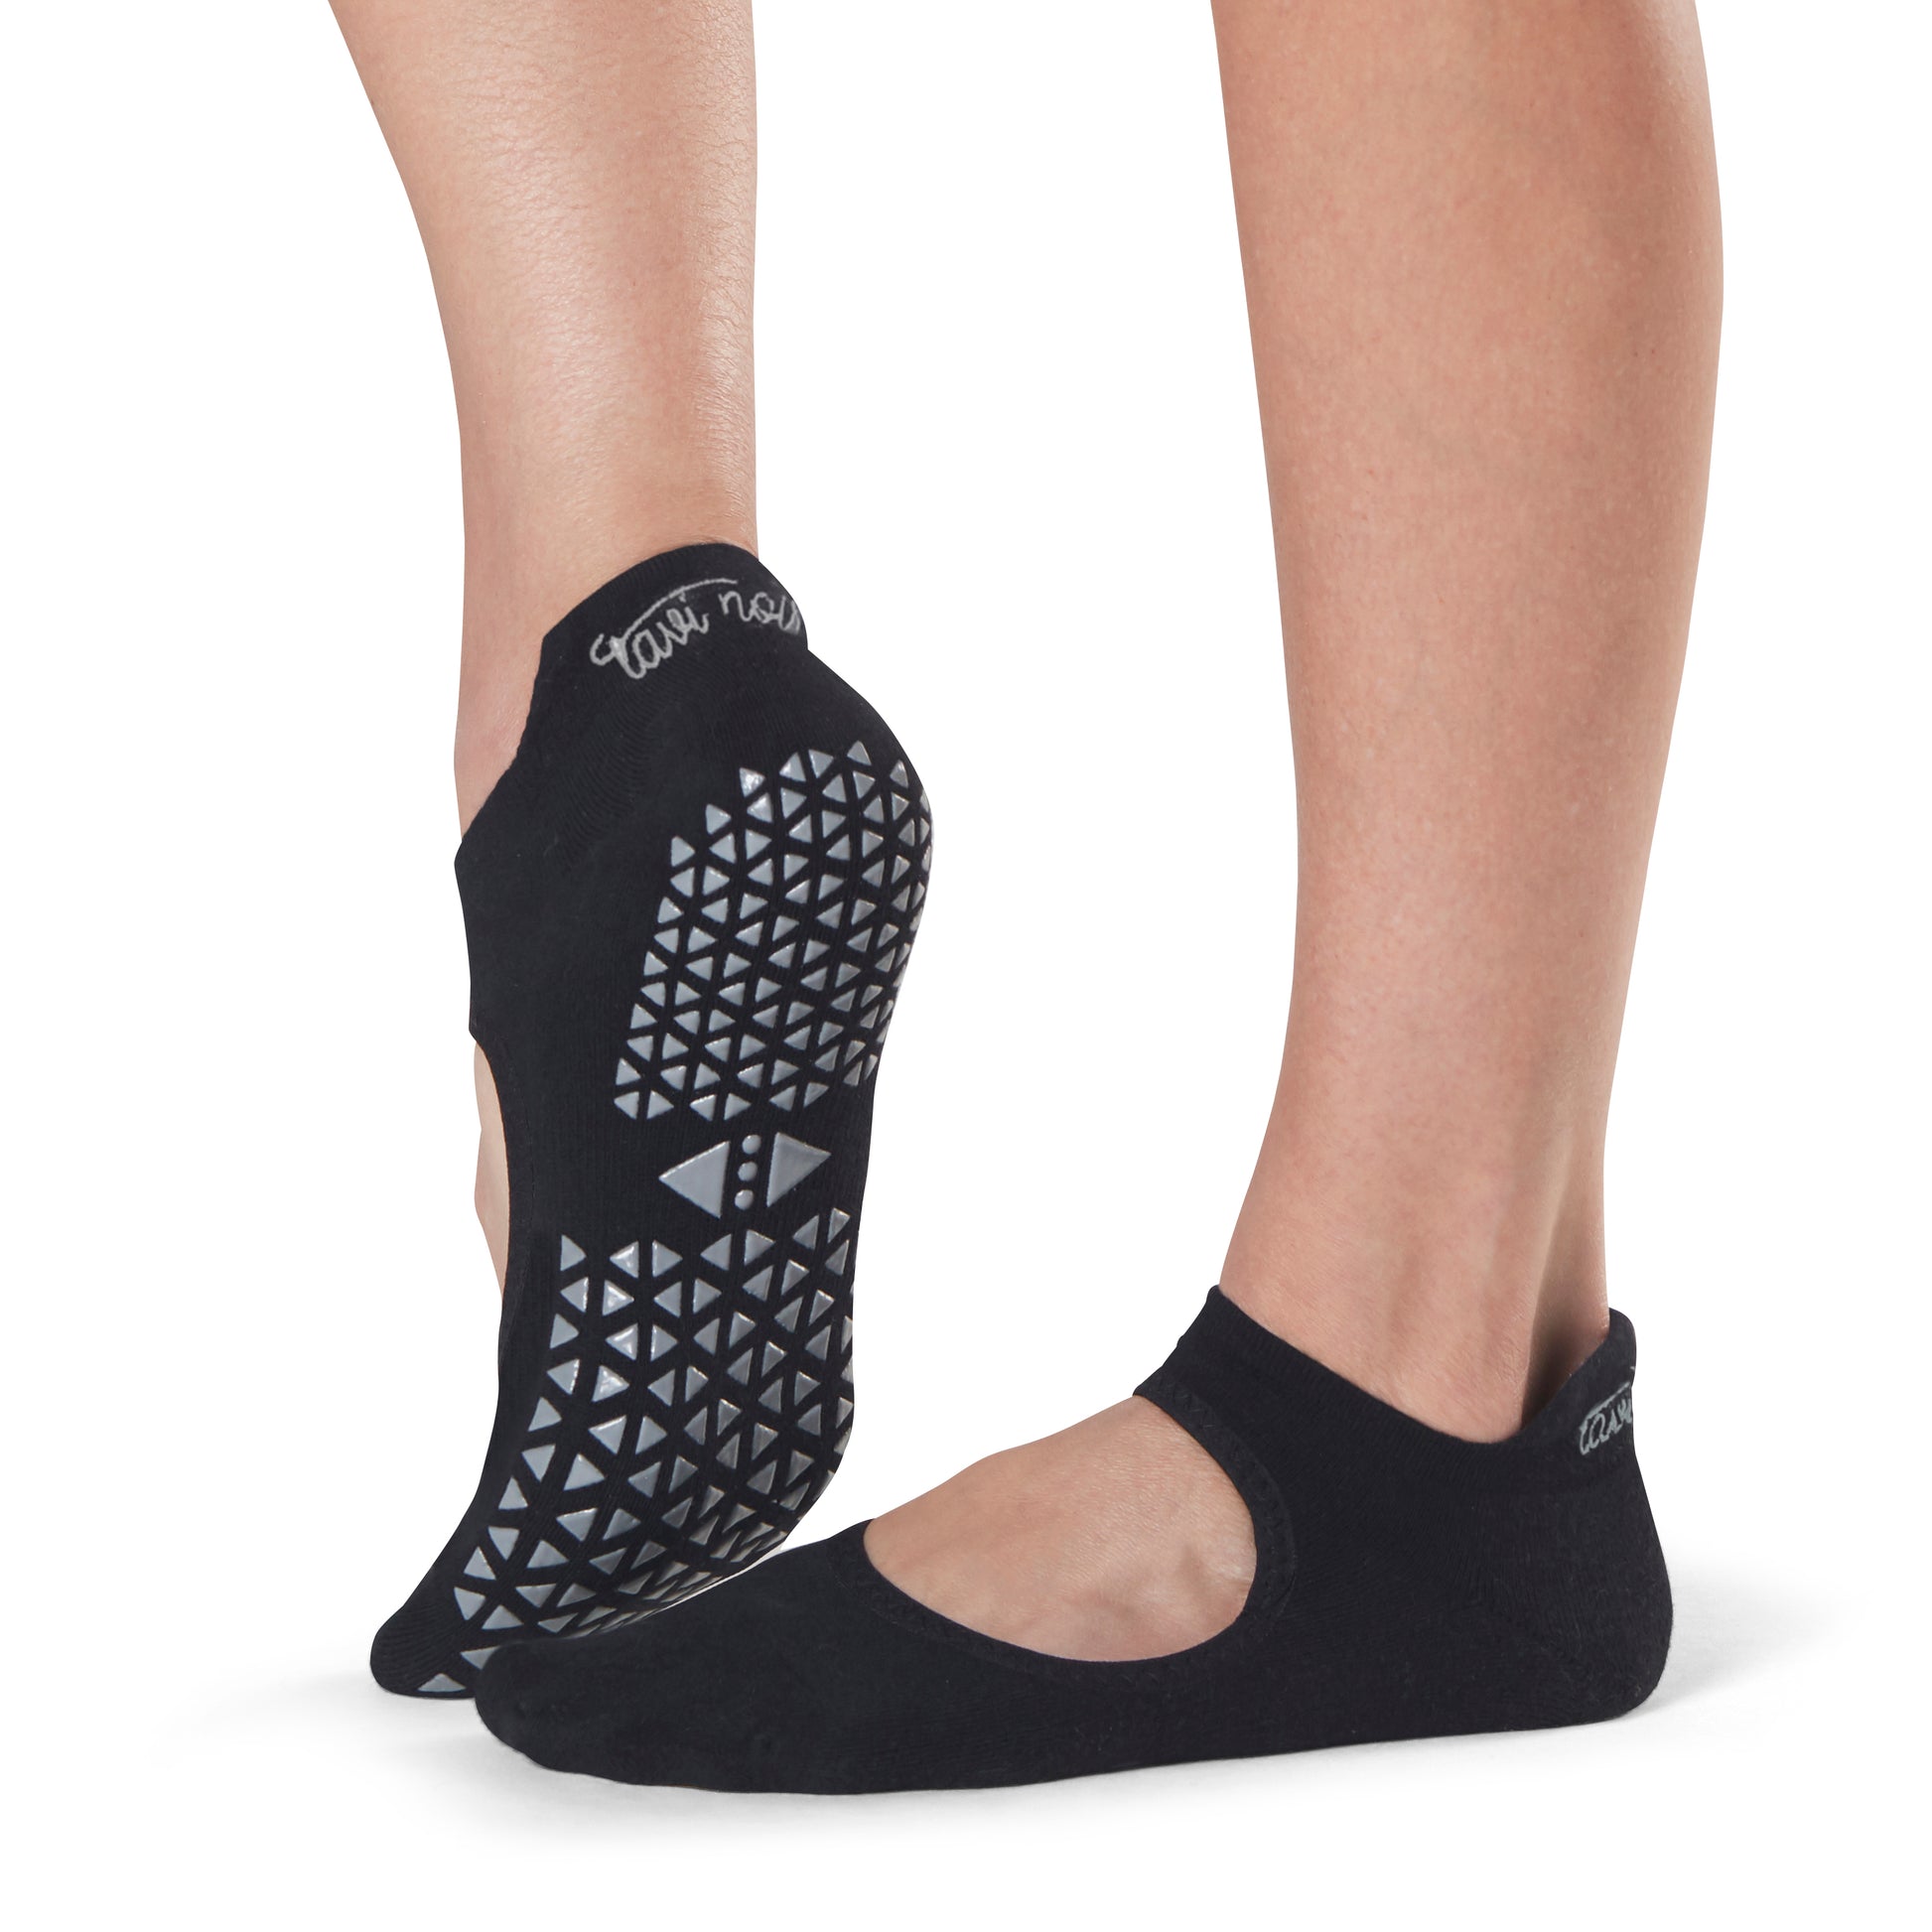 TaviNoir Emma Socks - black low ankle cotton yoga and pilates socks with gripper sole and open front ballerina style.